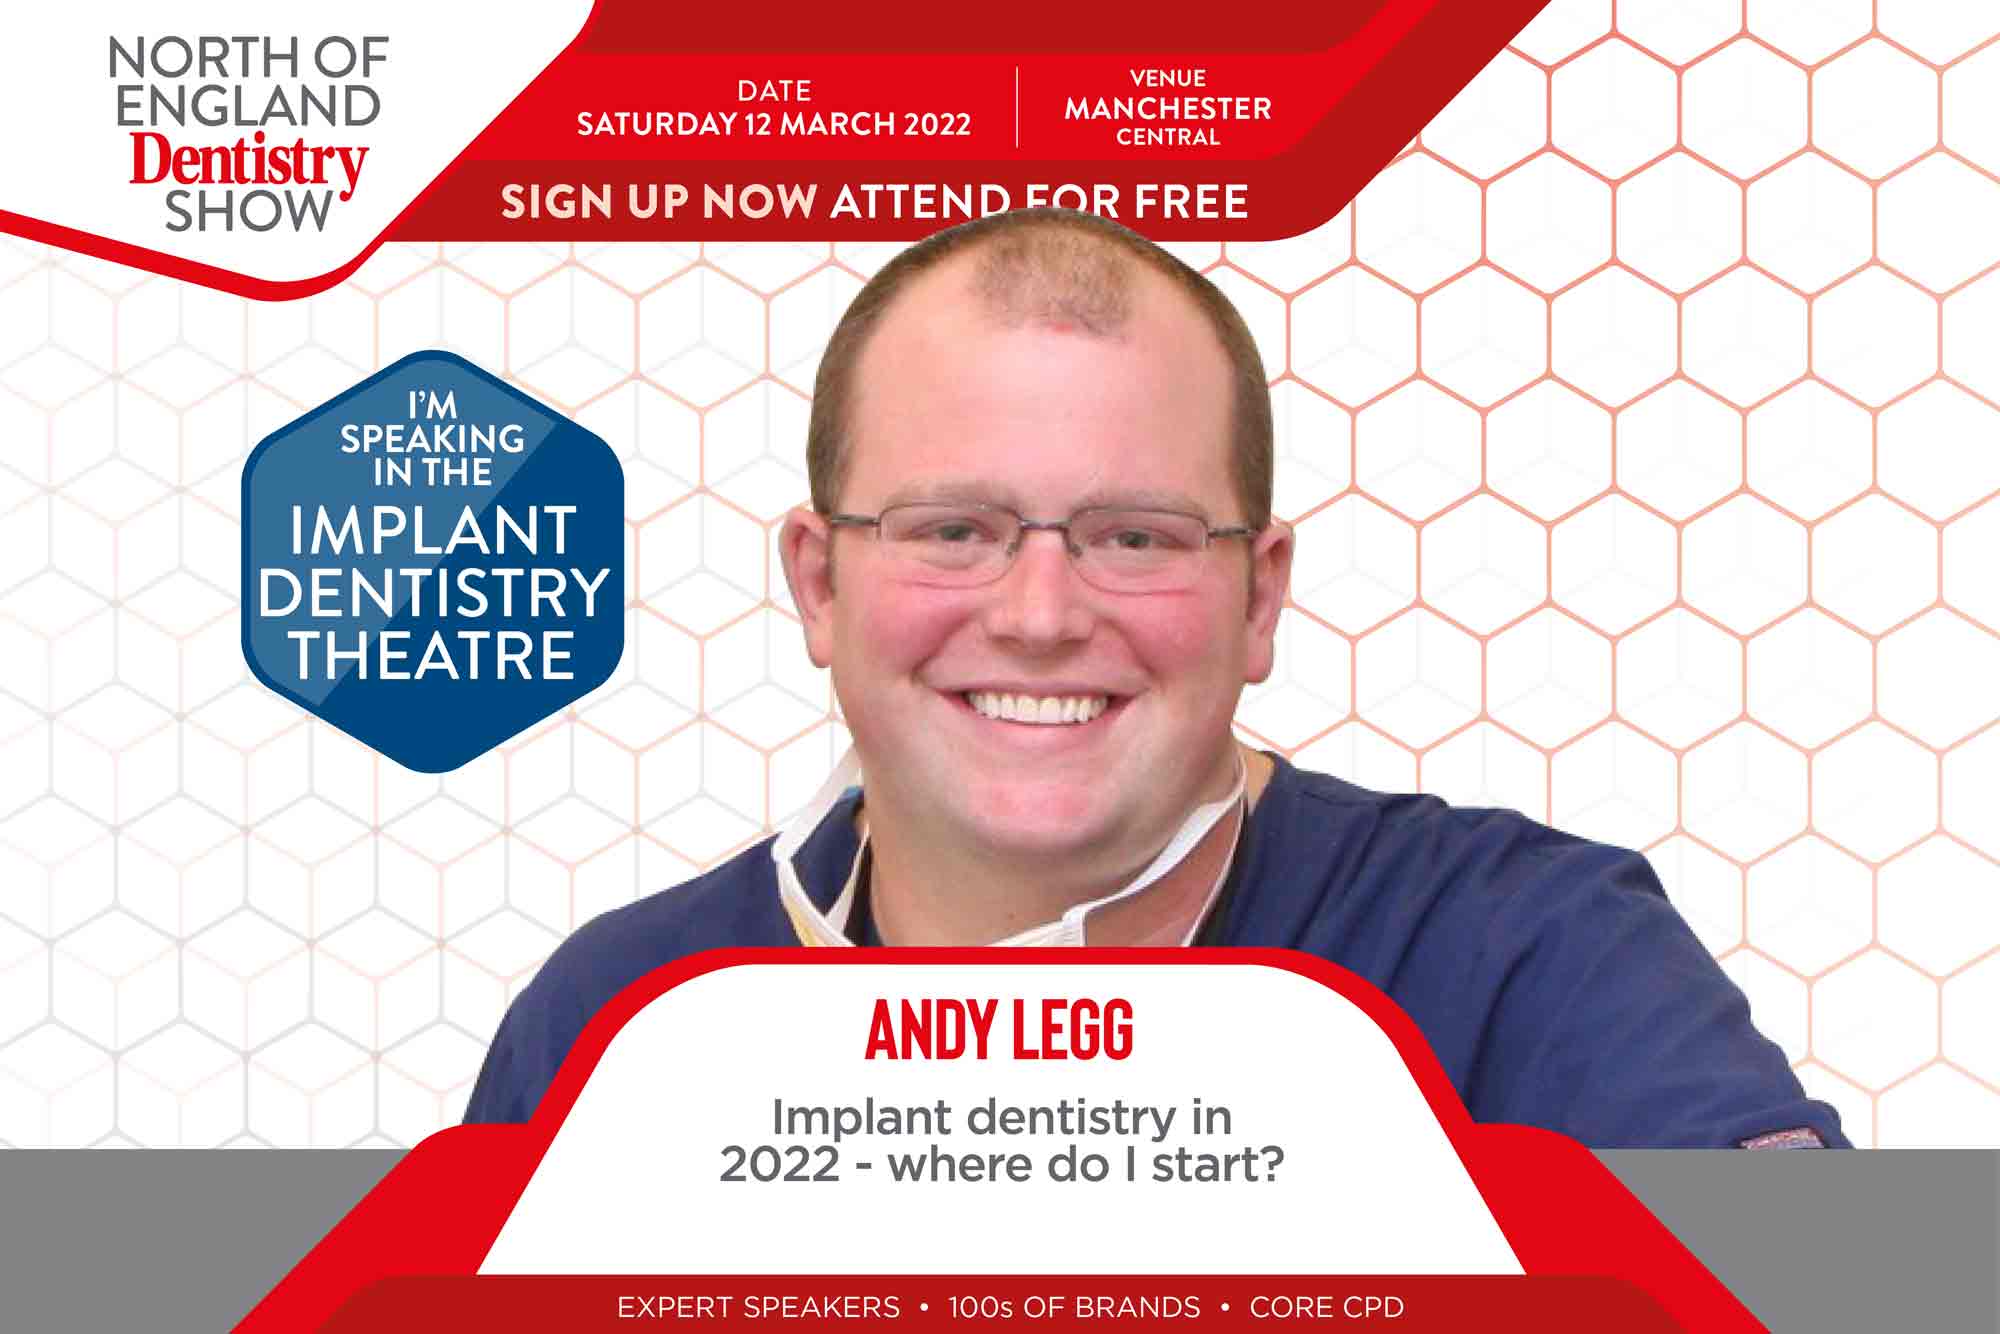 North of England Dentistry Show – Andy Legg